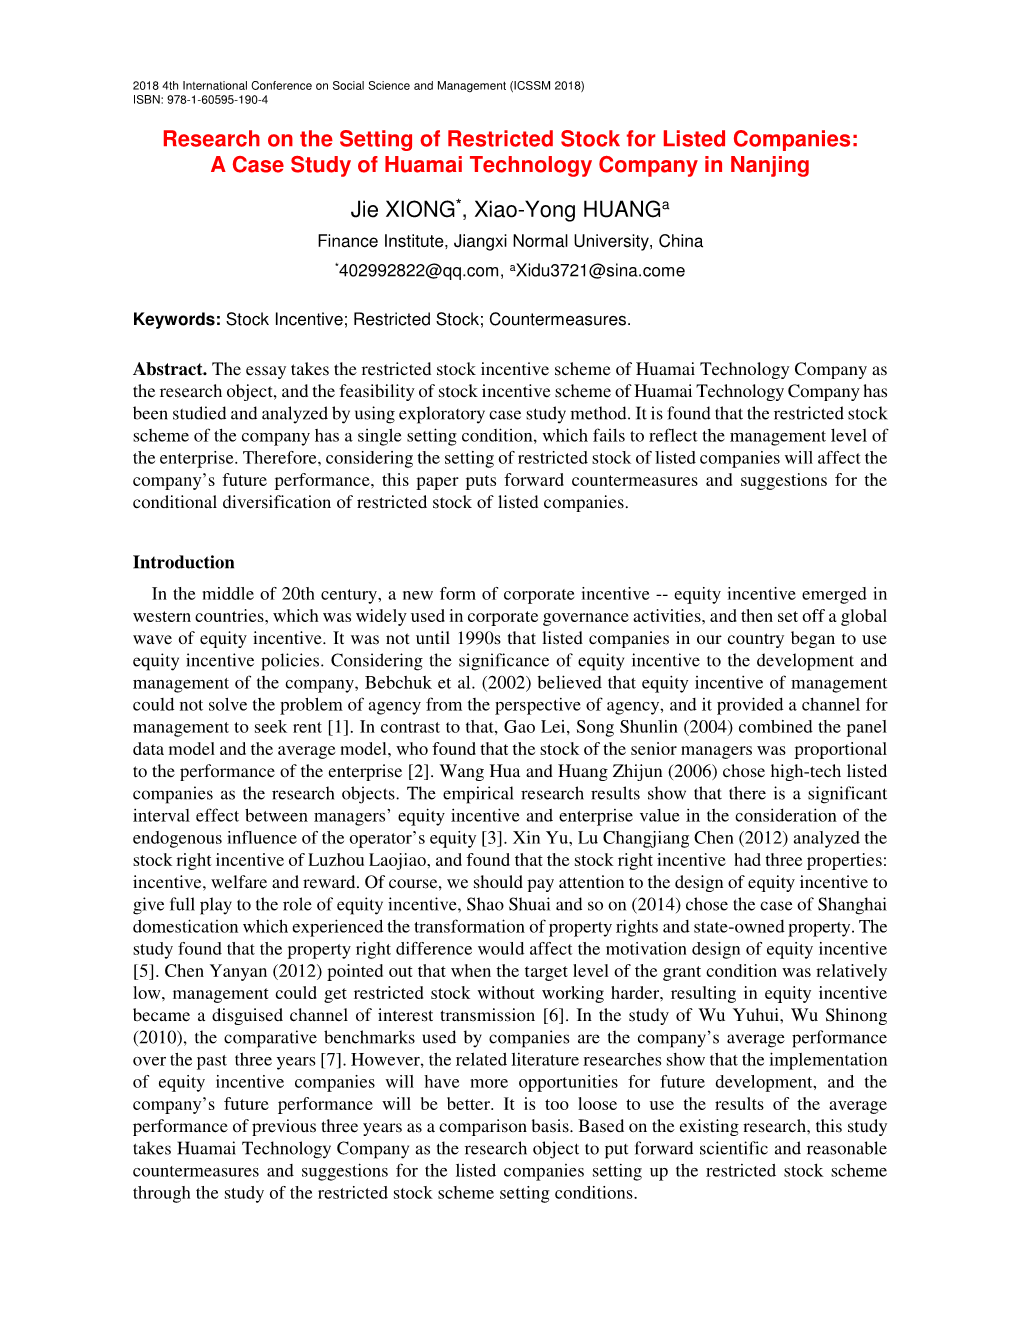 Research on the Setting of Restricted Stock for Listed Companies: a Case Study of Huamai Technology Company in Nanjing